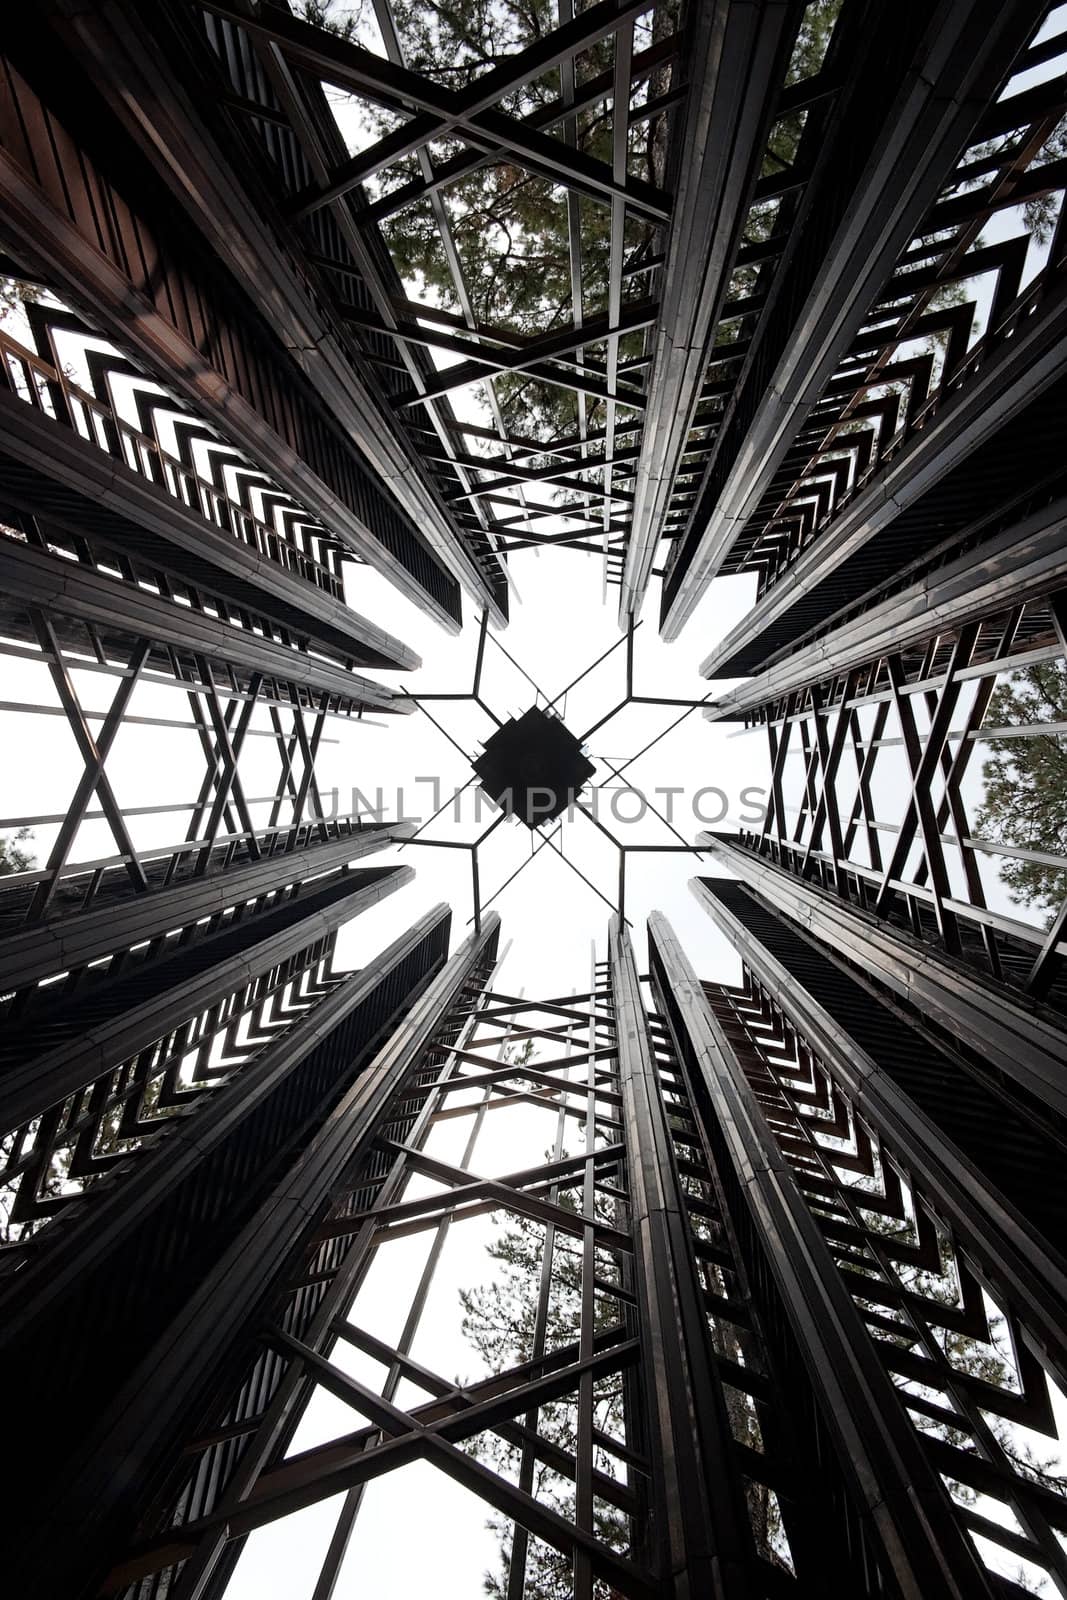 An abstract center of a wood ceiling inside a tower